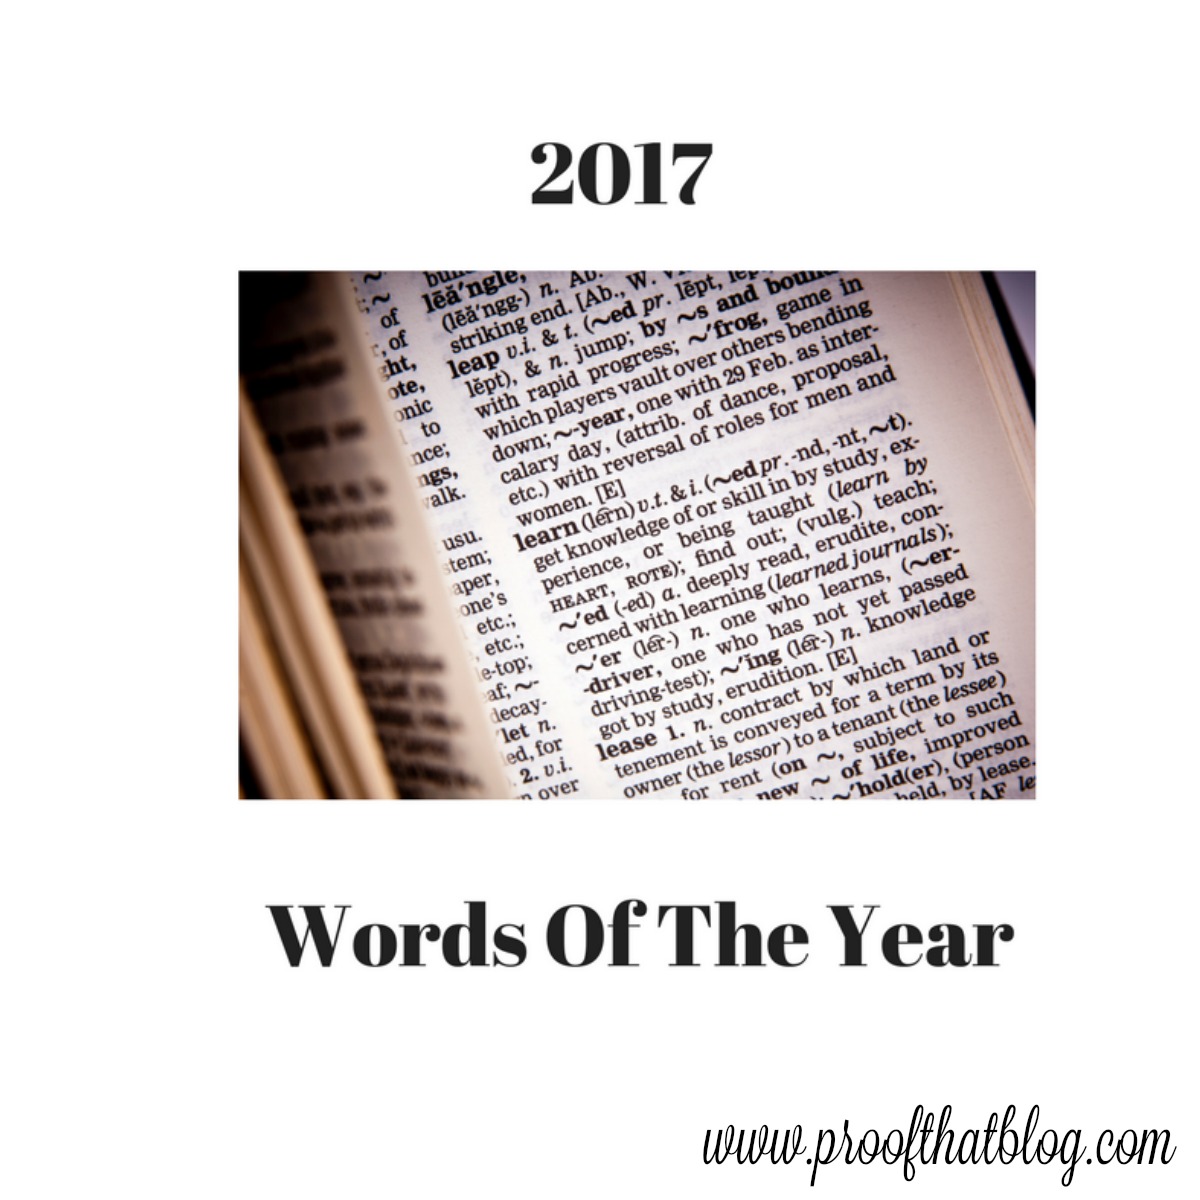 2017 Words of the Year